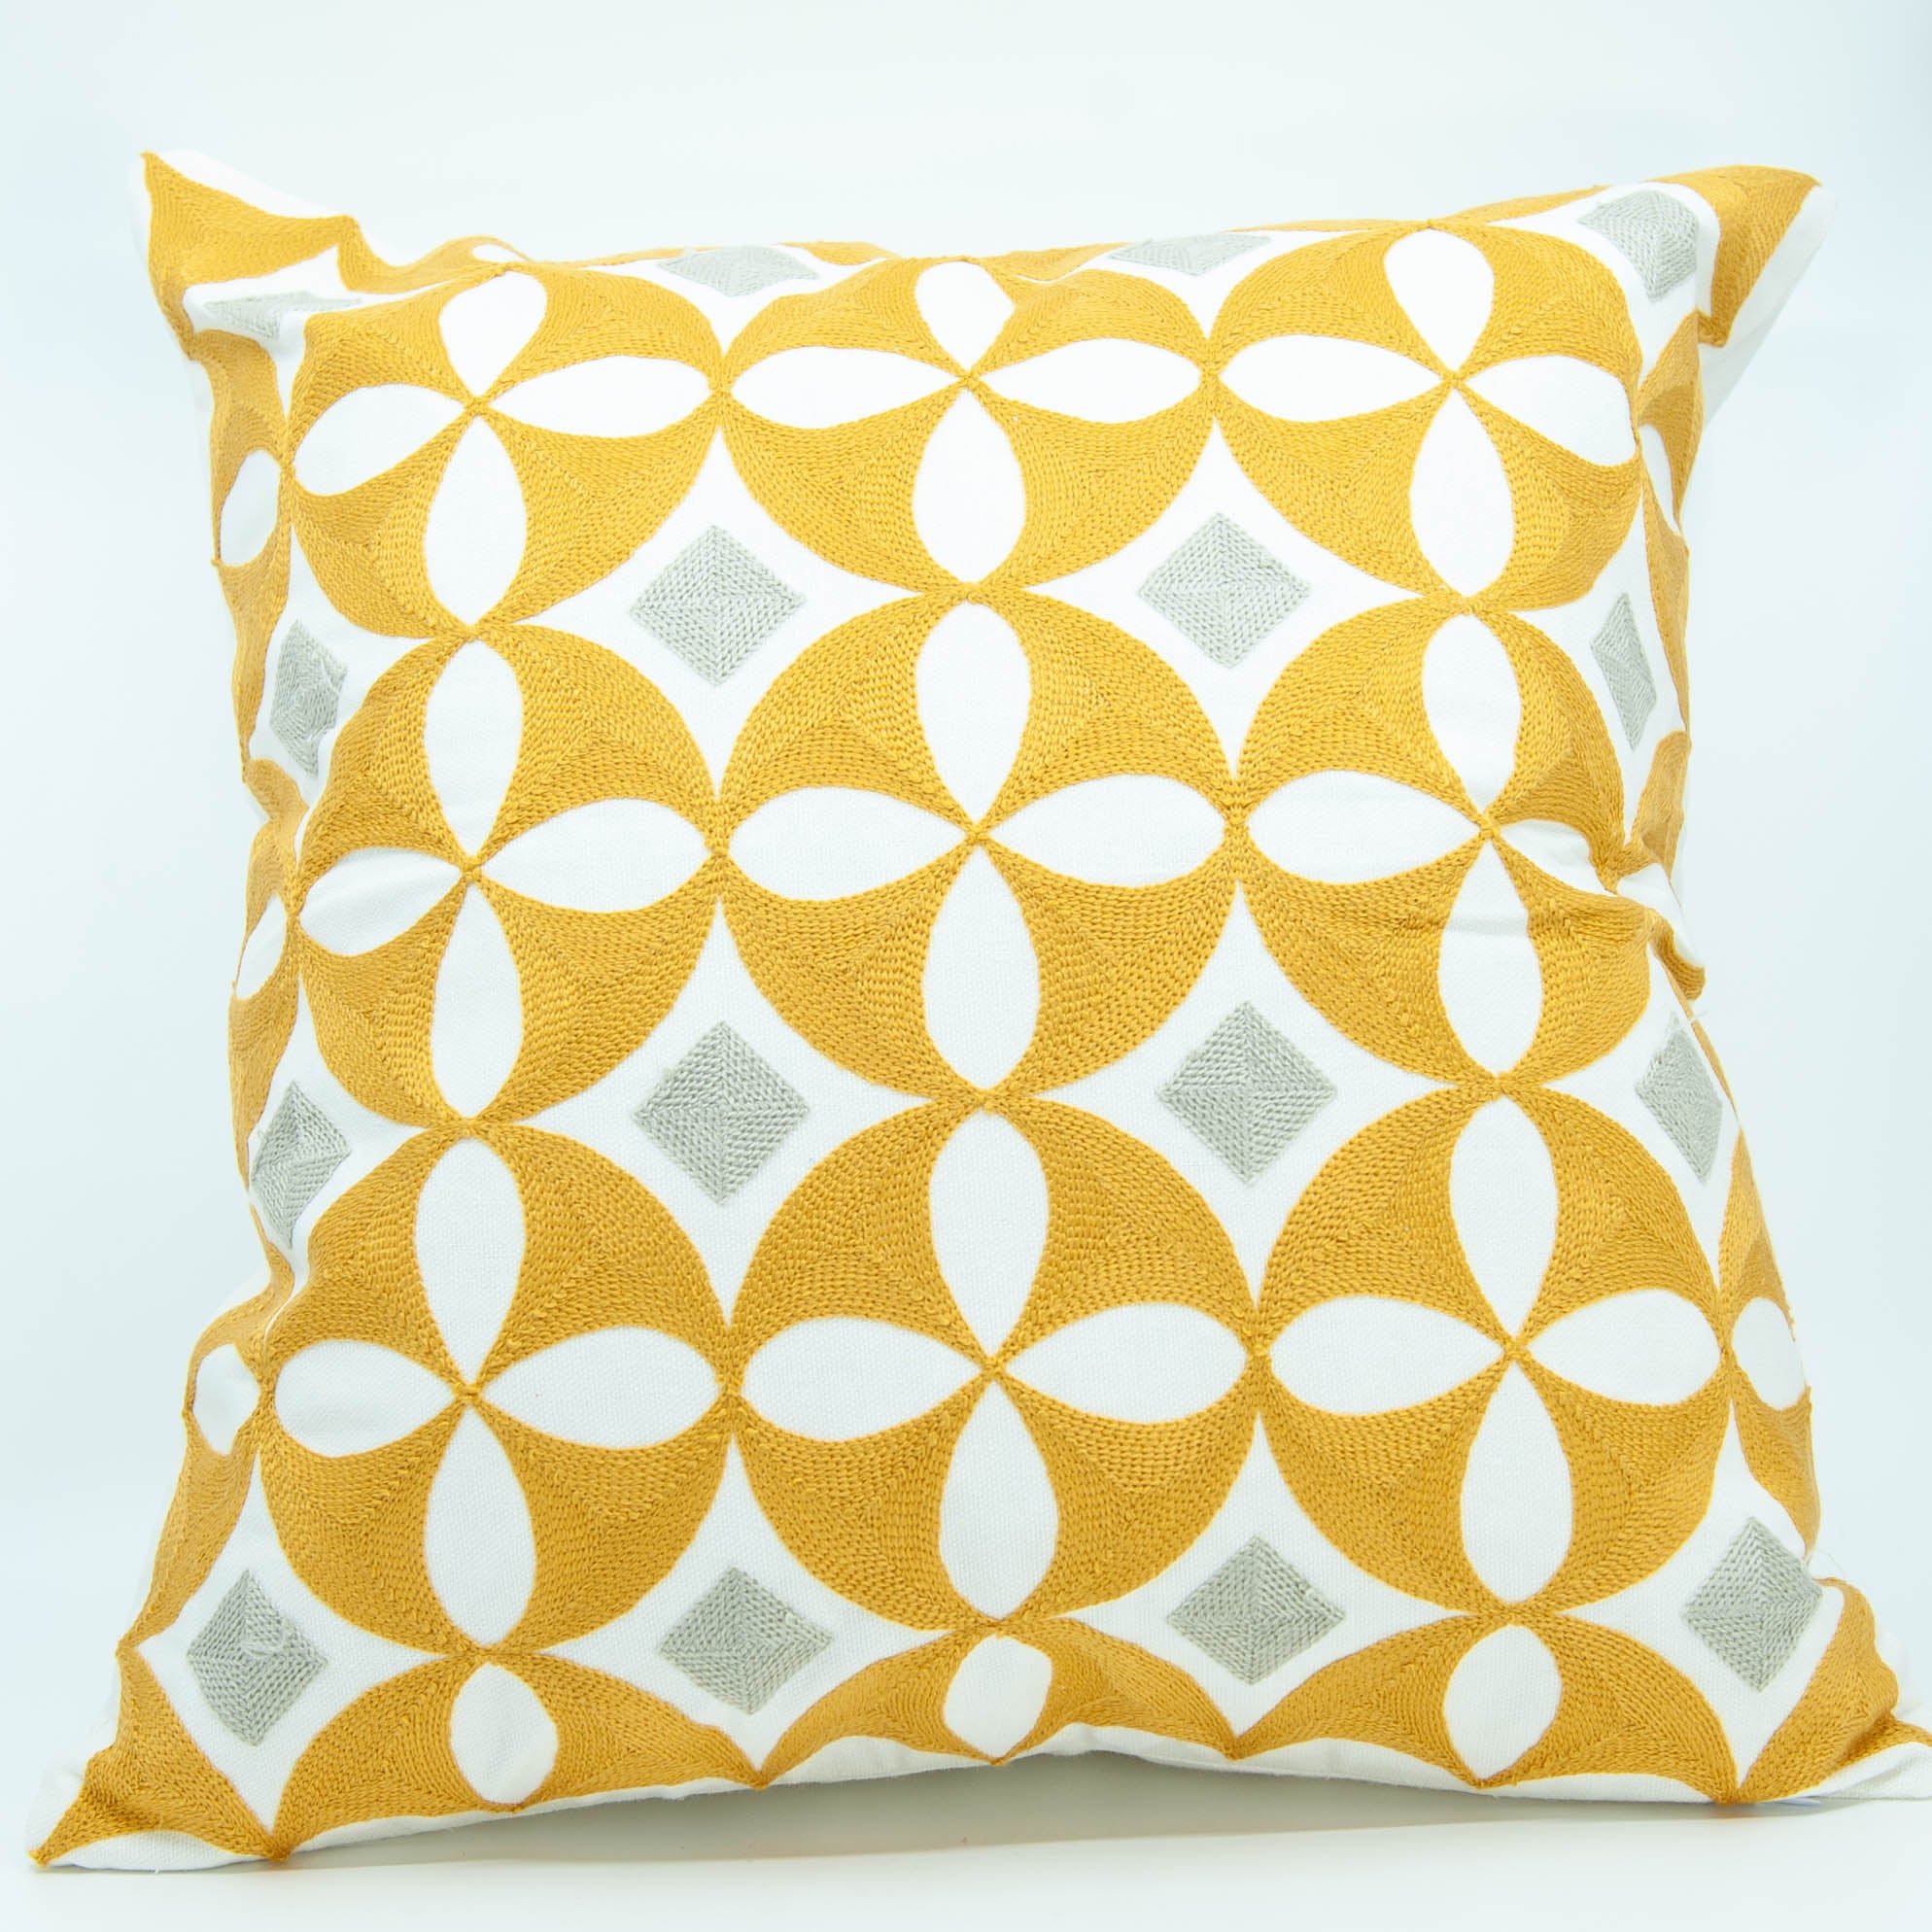 Embroidered Pillow Cover - Yellow Circle